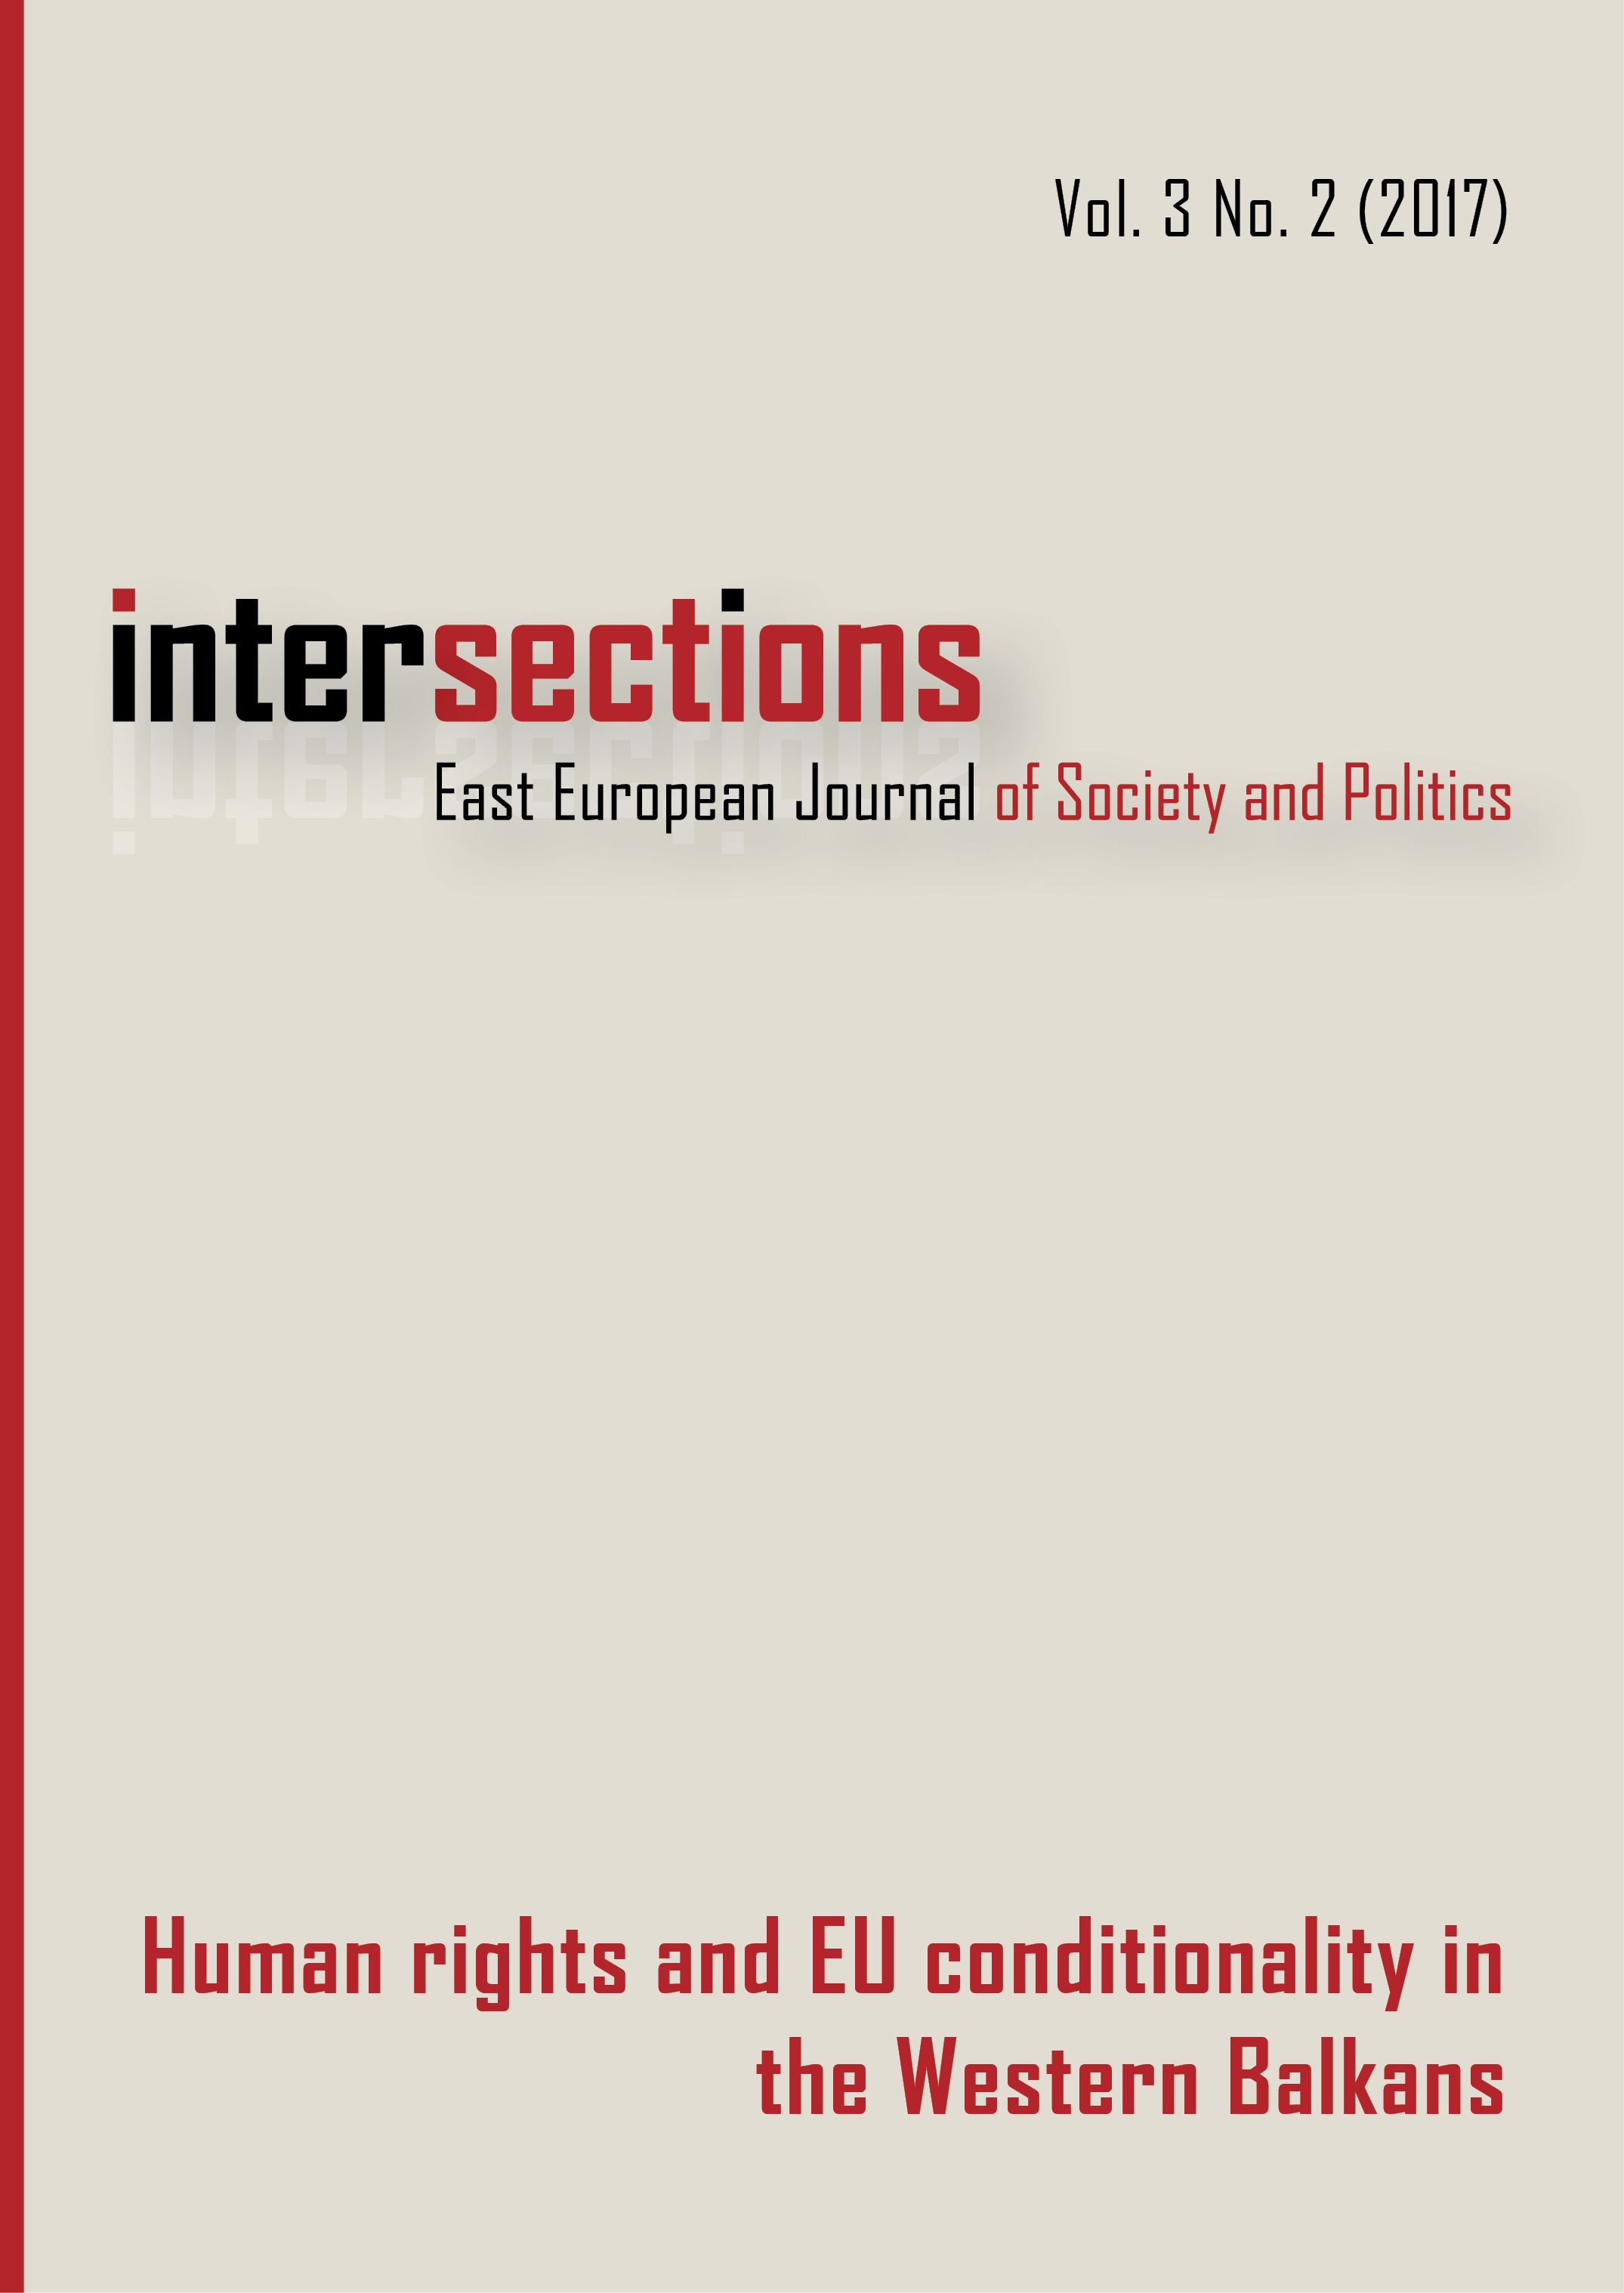 					View Vol. 3 No. 2 (2017): Human Rights and EU Conditionality in the Western Balkans
				